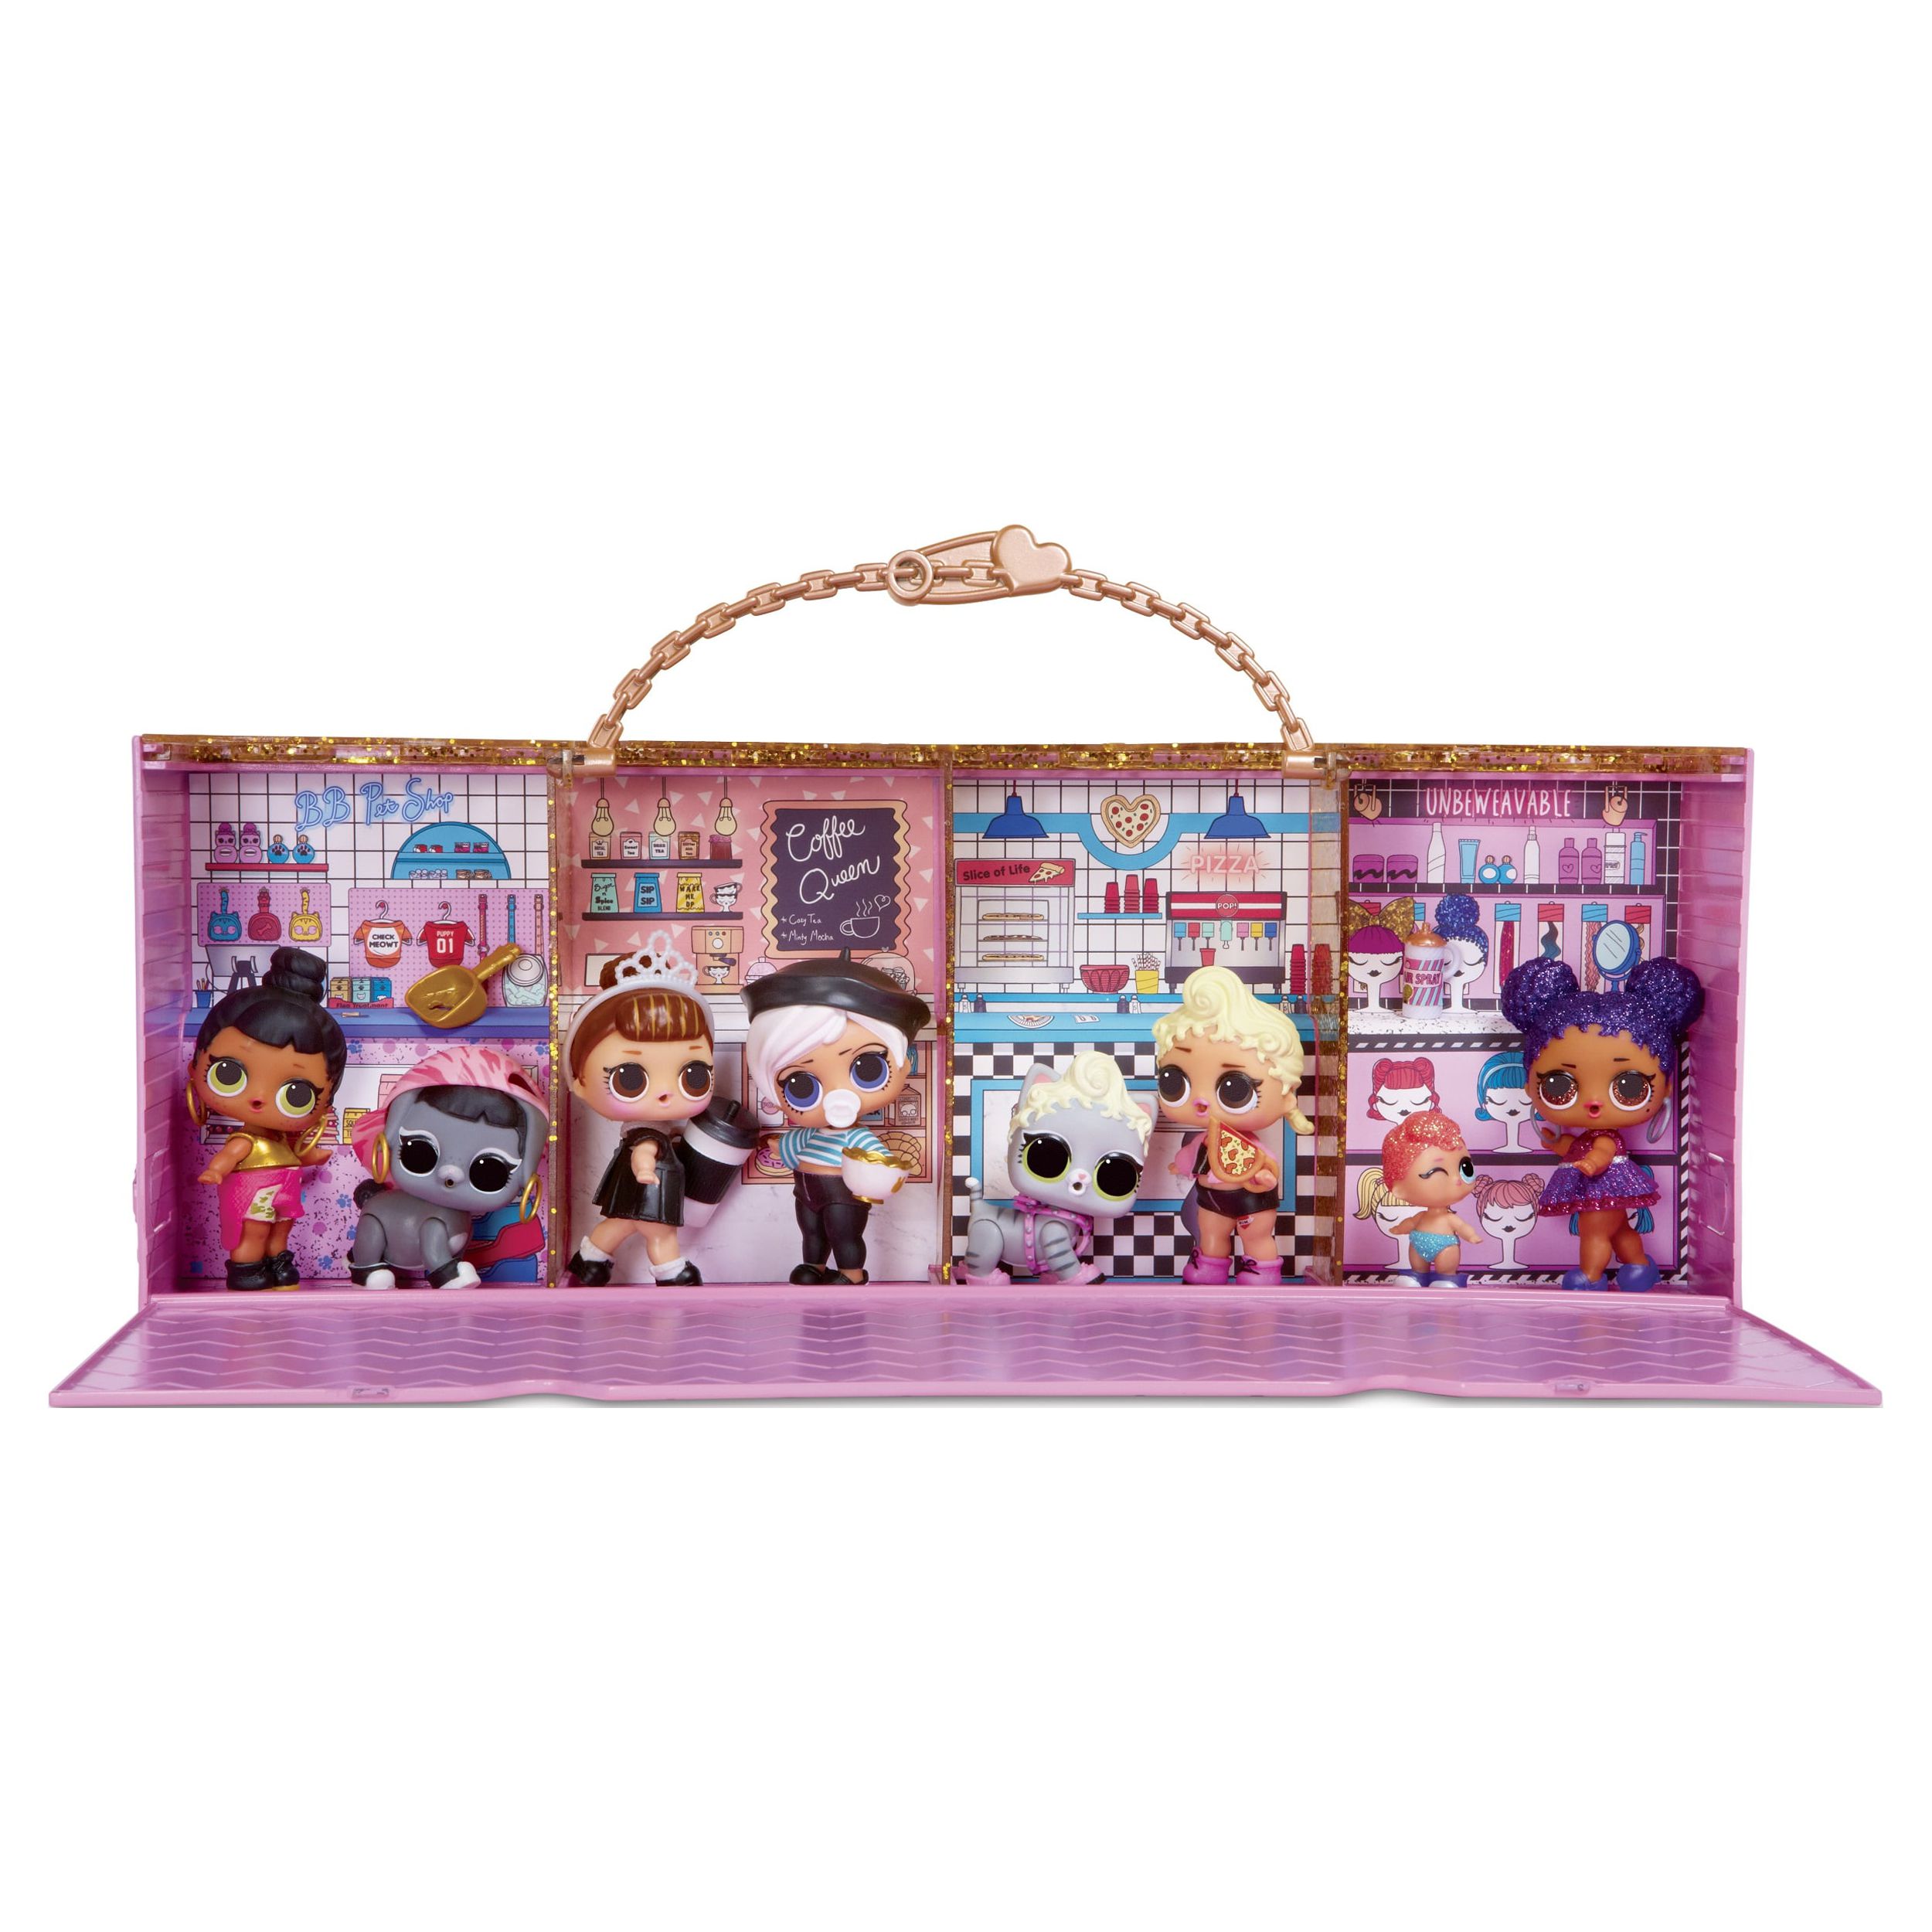 LOL Surprise 3-in-1 Pop-Up Store With Exclusive Doll & Carrying Case - Toy for Girls Ages 4 5 6+ - image 2 of 6